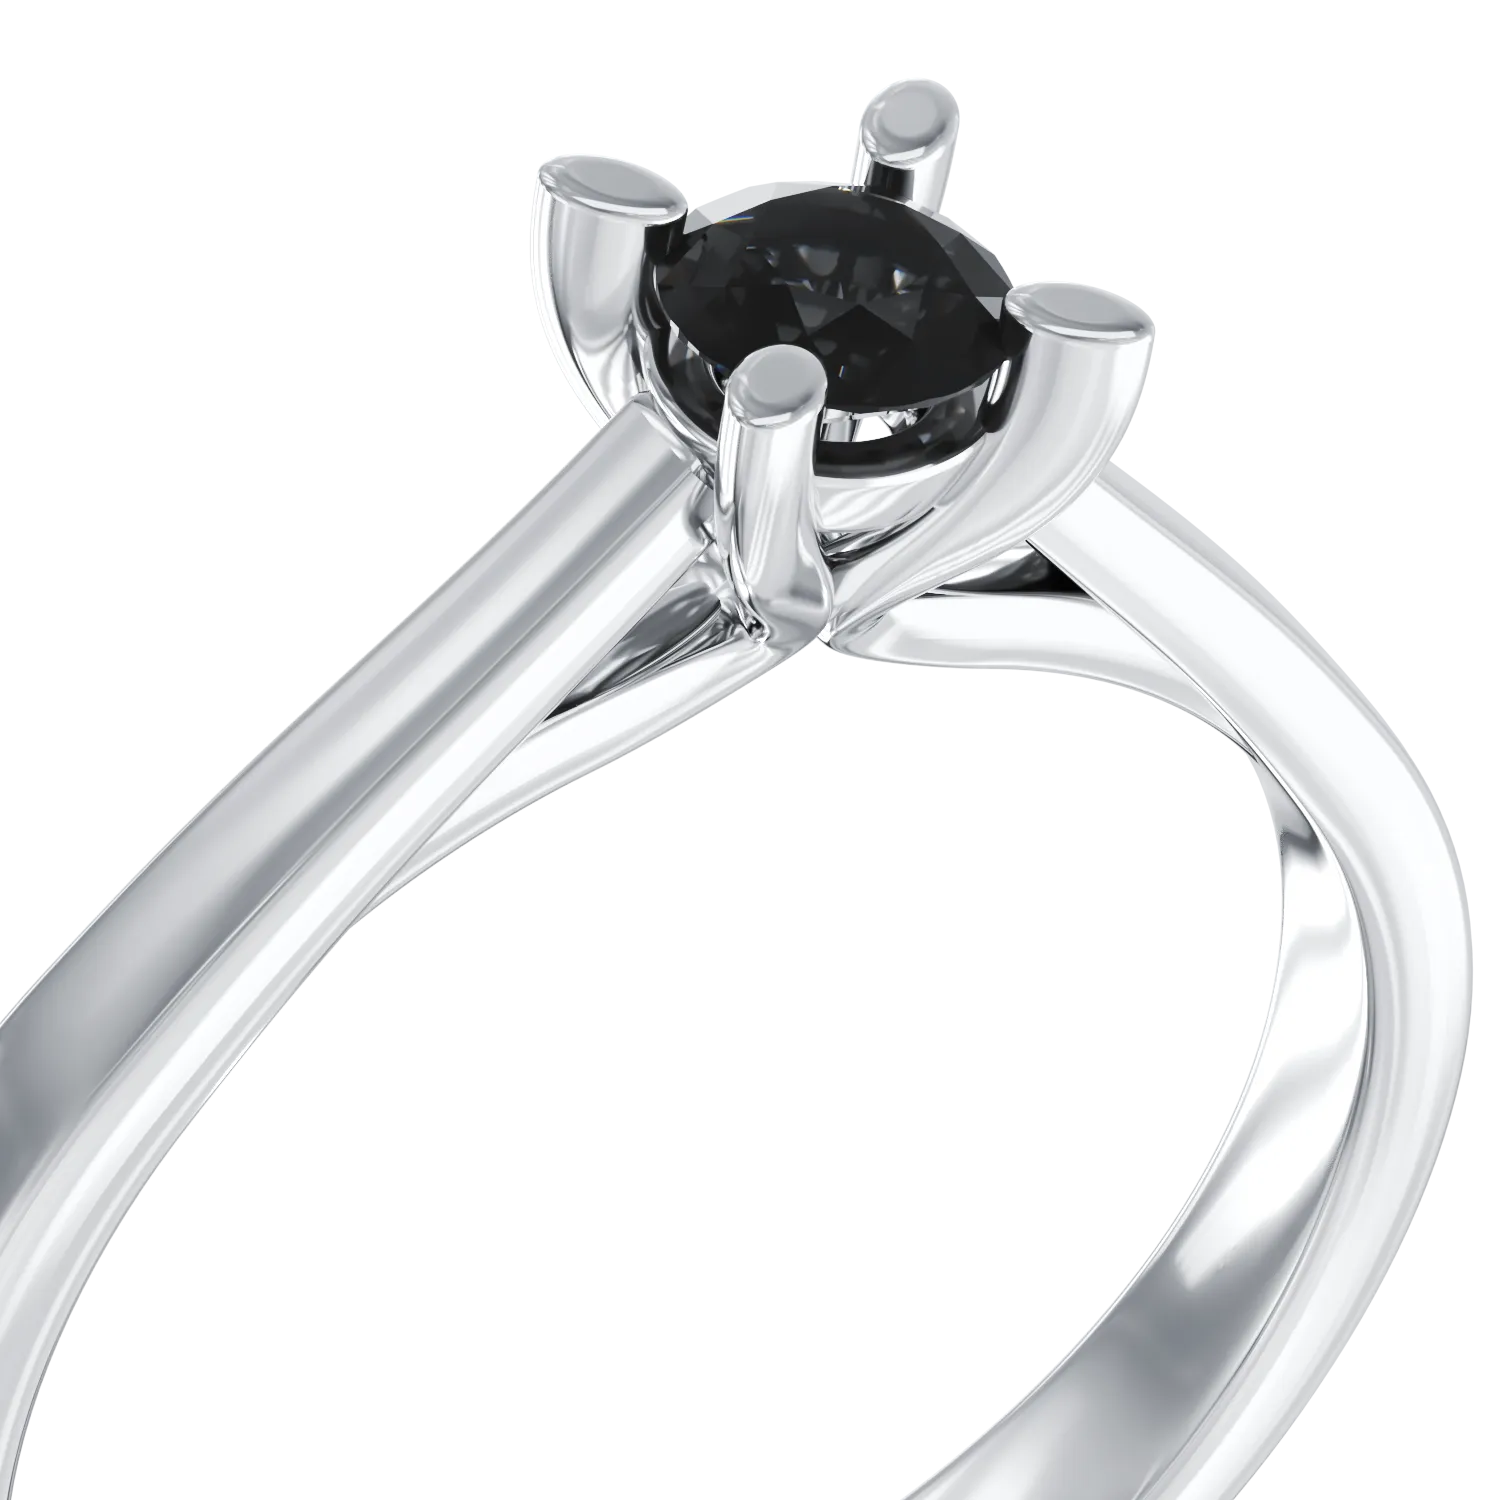 18K white gold engagement ring with 0.2ct black diamond